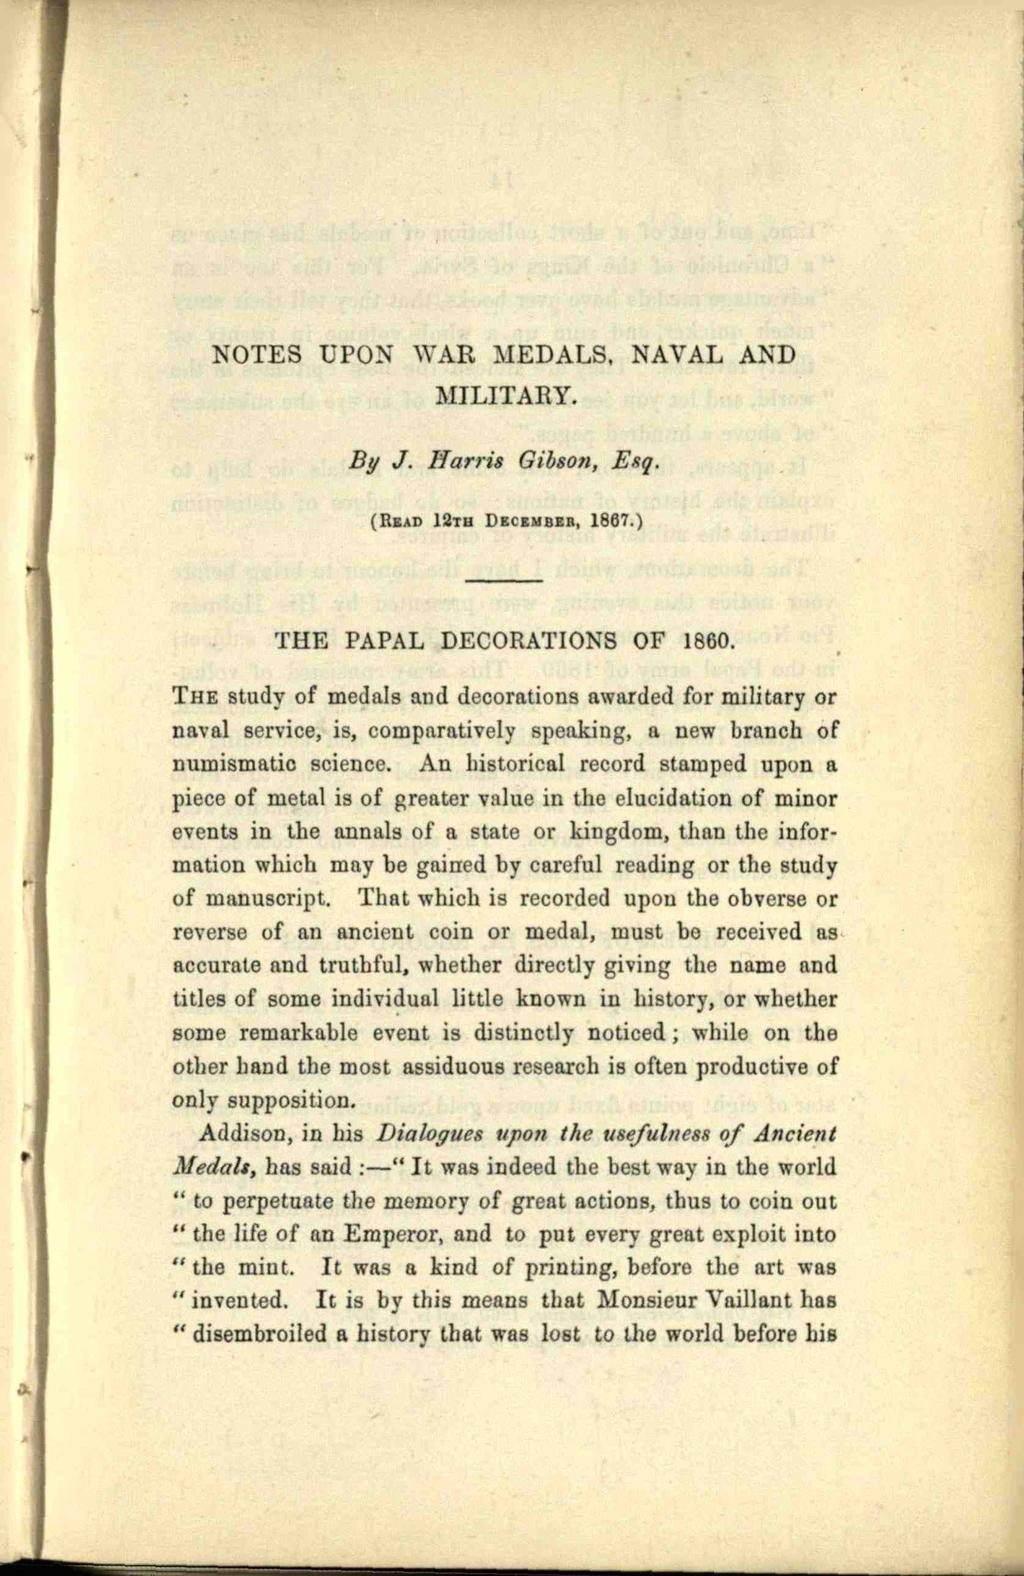 NOTES UPON WAR MEDALS, NAVAL AND MILITARY. By J. Harris Gibson, Esq. (READ 12TH DECEMBER, 1867.) THE PAPAL DECORATIONS OF 1860.